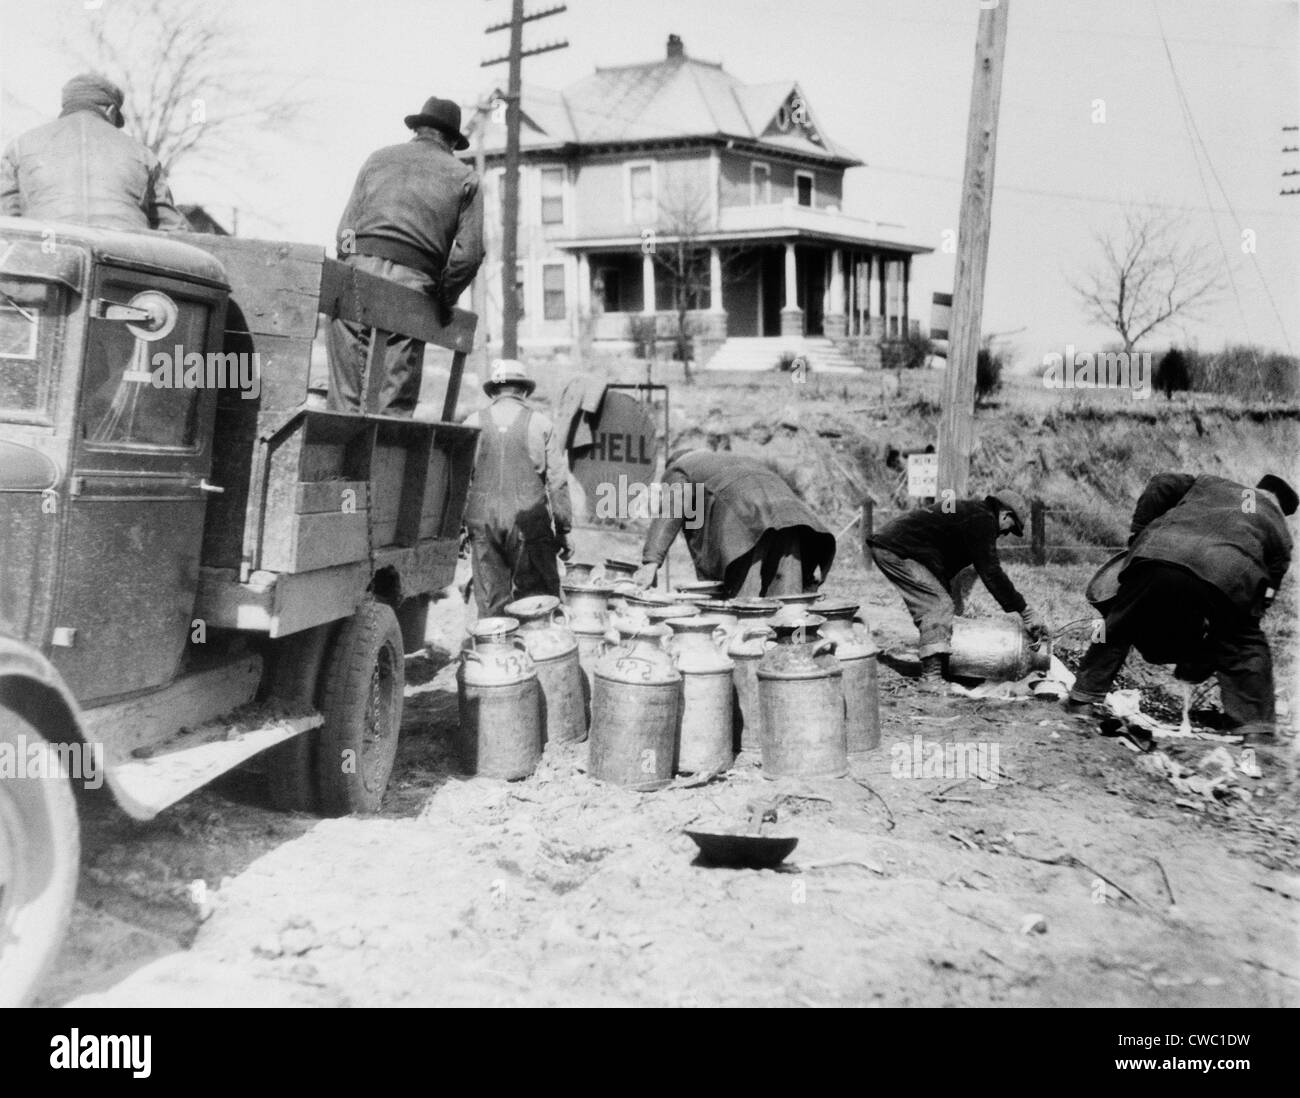 Striking farmers dump milk cans from a truck they have stopped to prevent delivery to market during the Great Depression. Milk Stock Photo